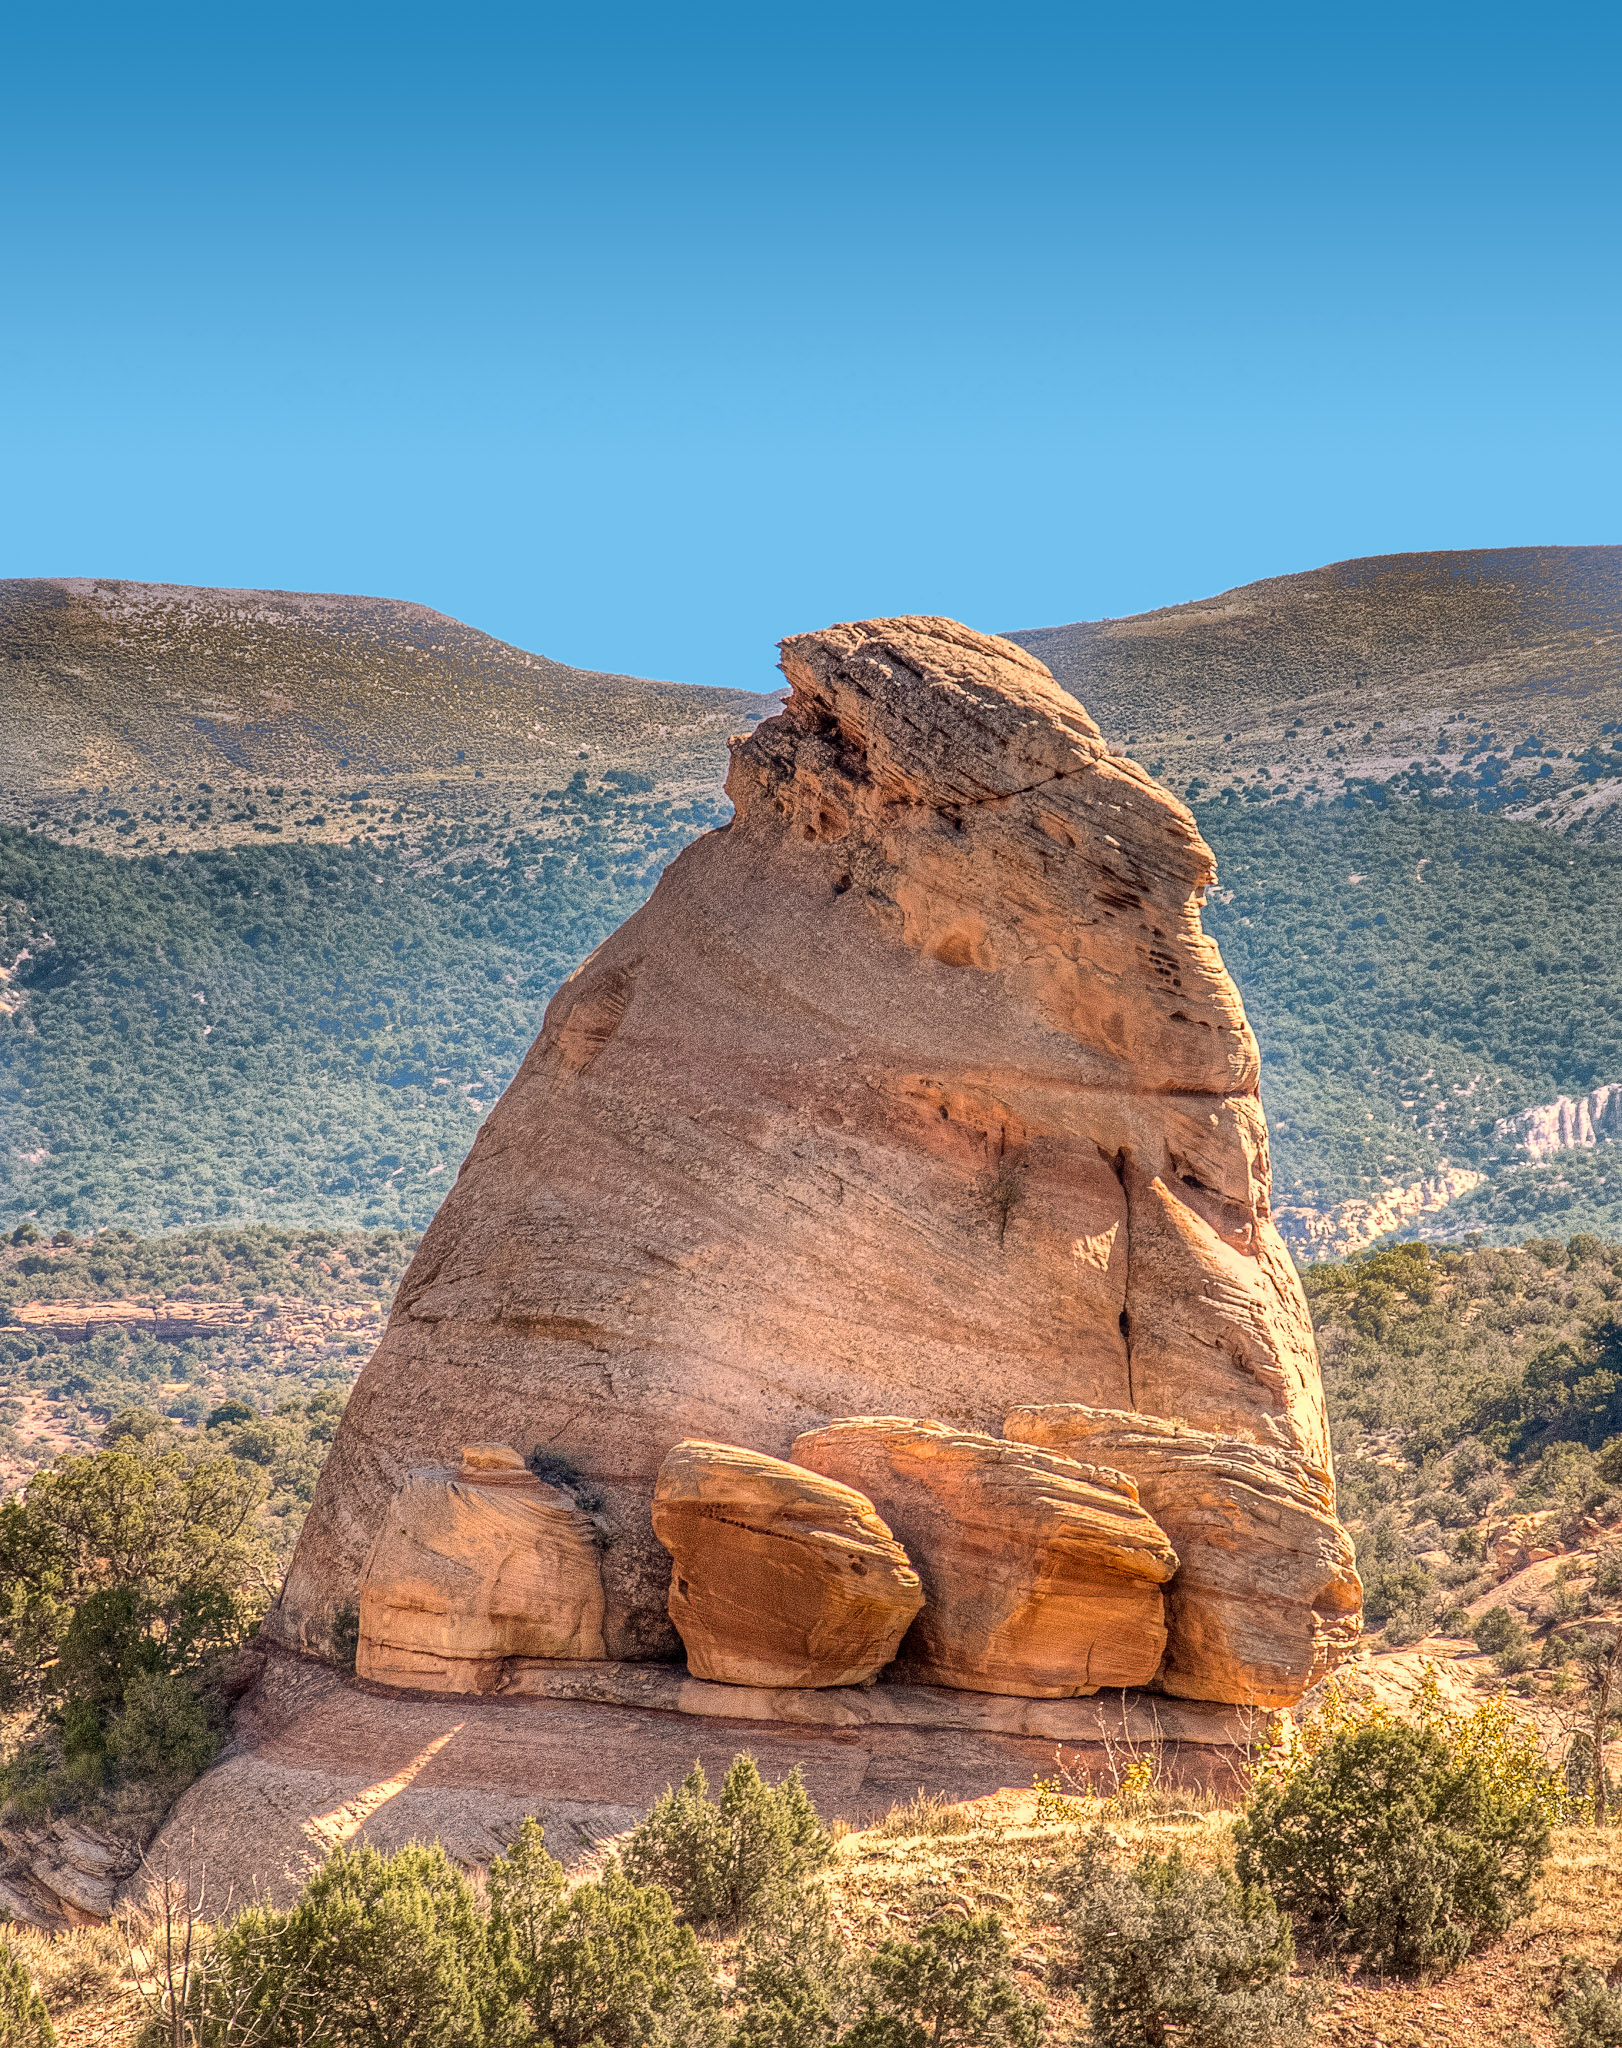 This rock formation sits along Cub Creek Road in Dinosaur National Monument in Utah.